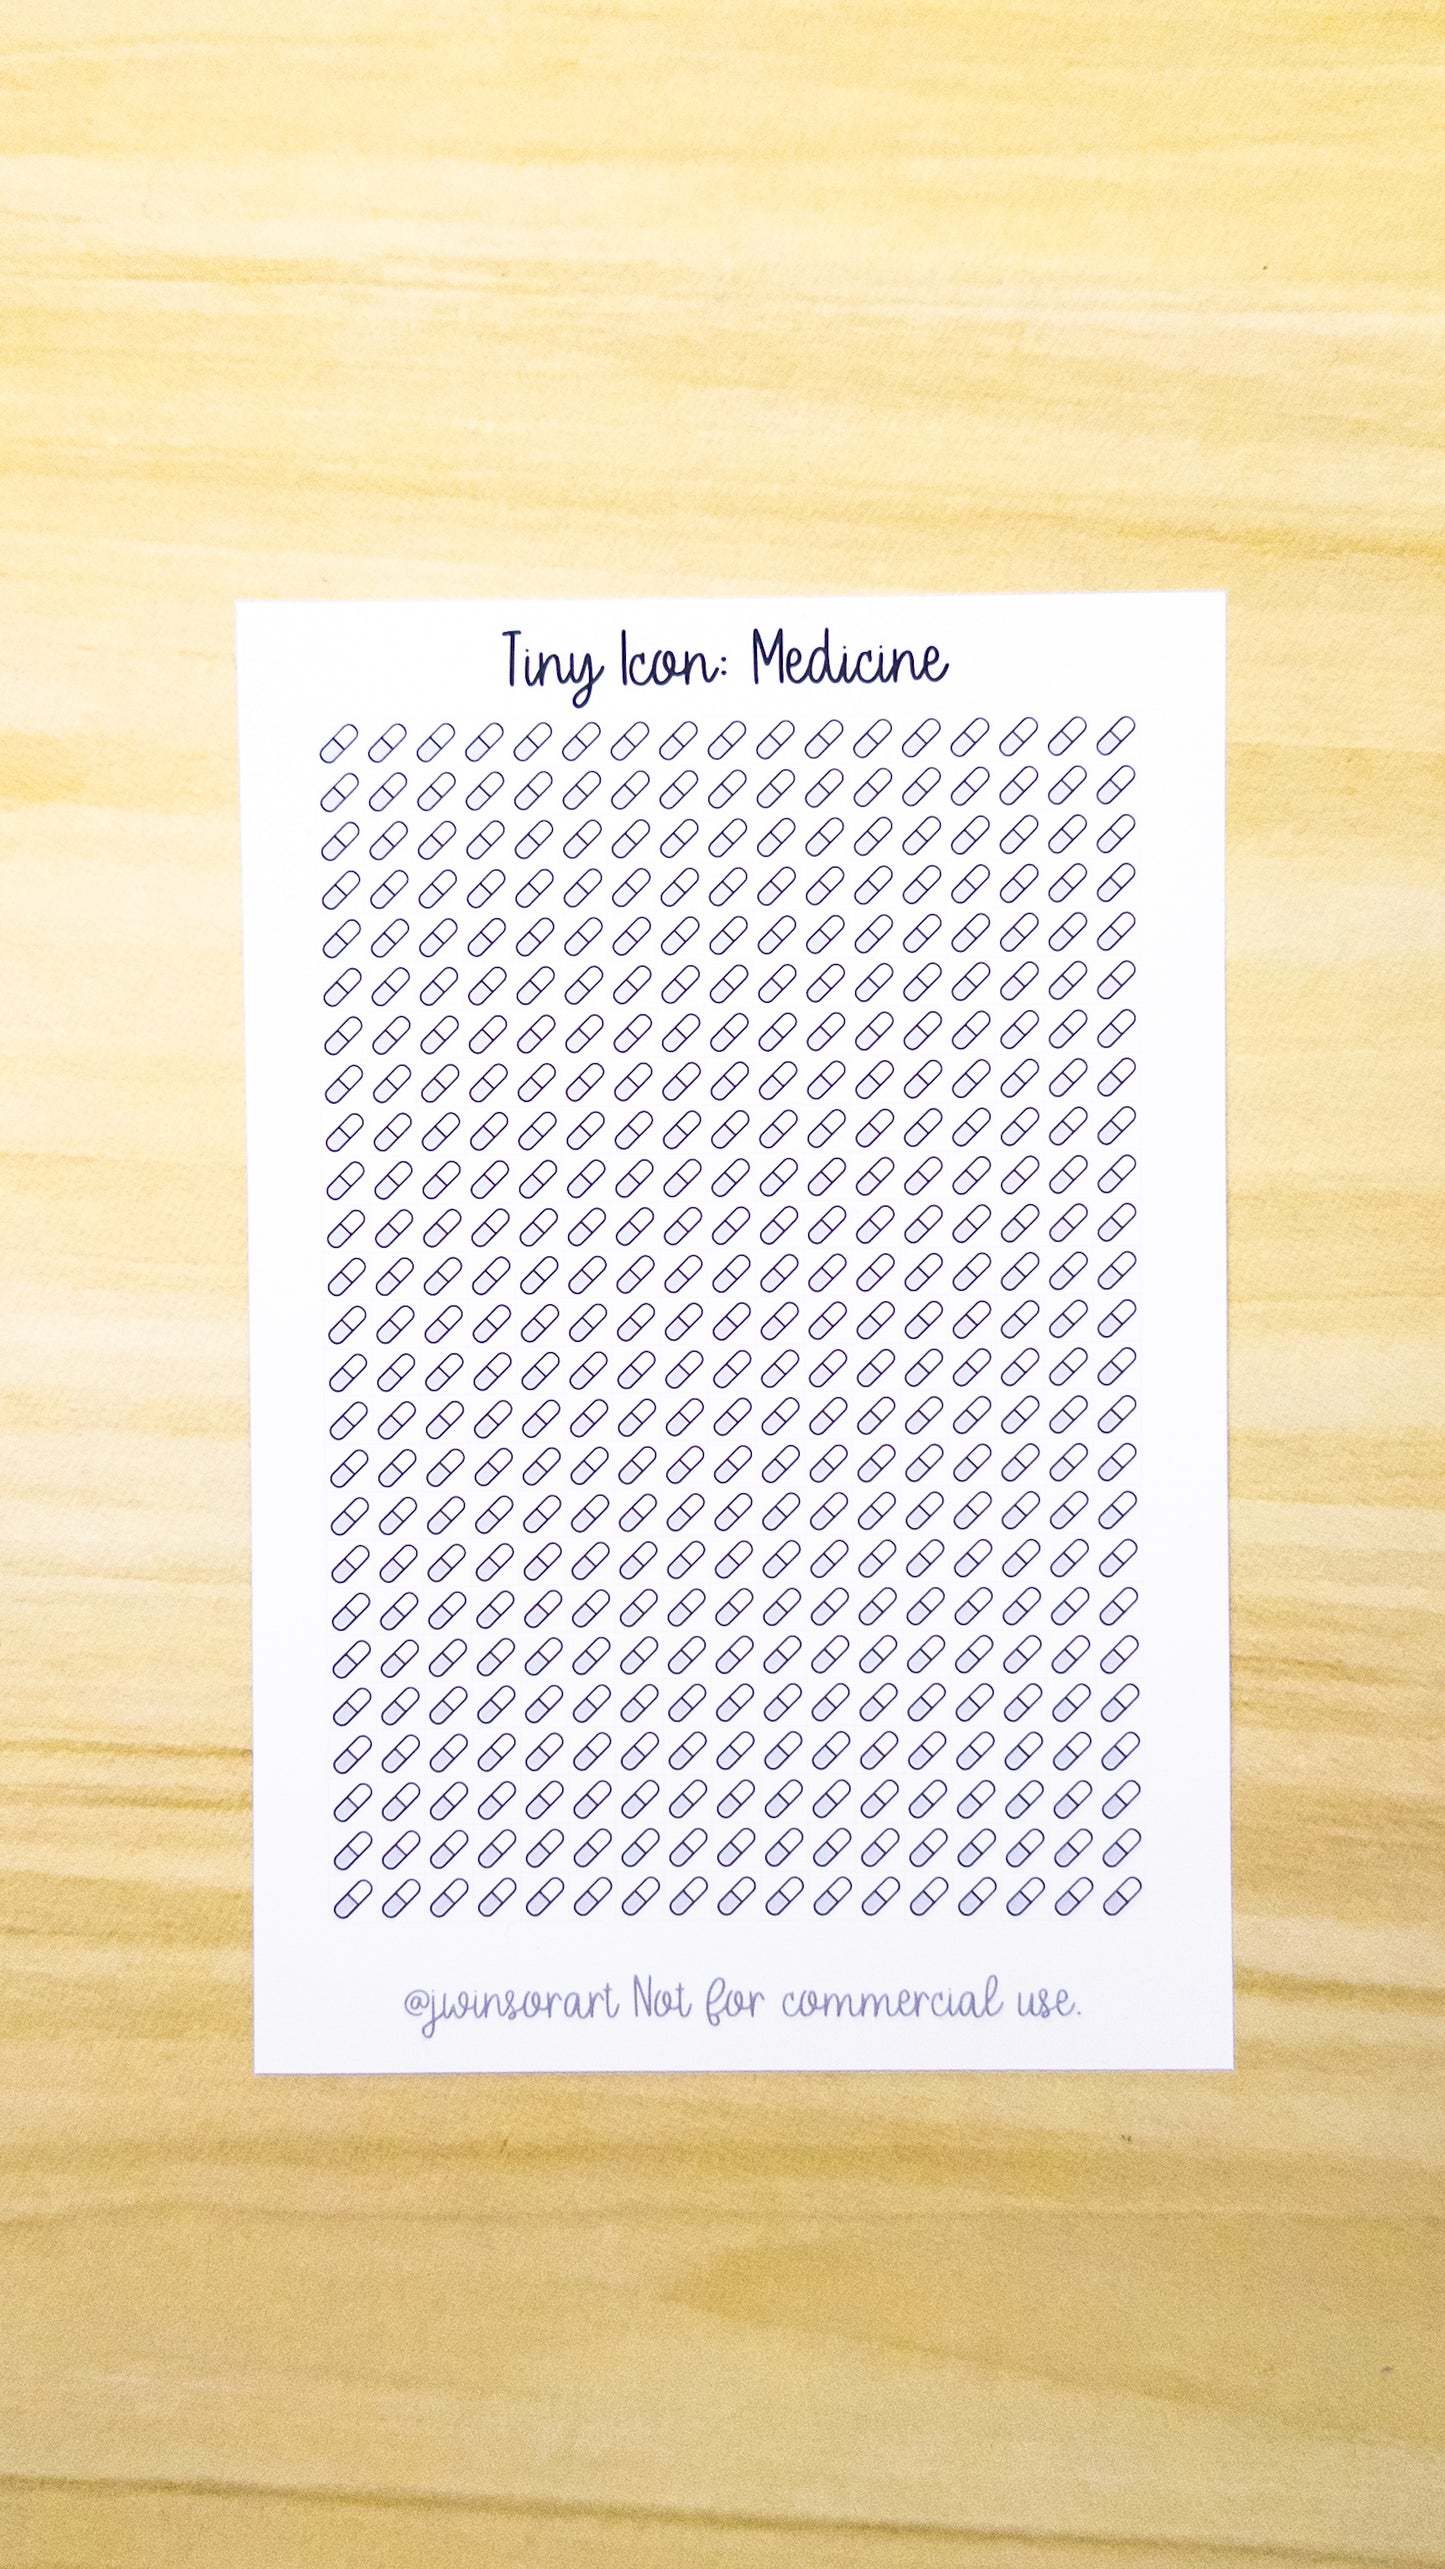 Tiny Icon: Medicine Pill Doodle Functional Sticker Sheet 5 mm Square Email Bujo Cute Line Art Style